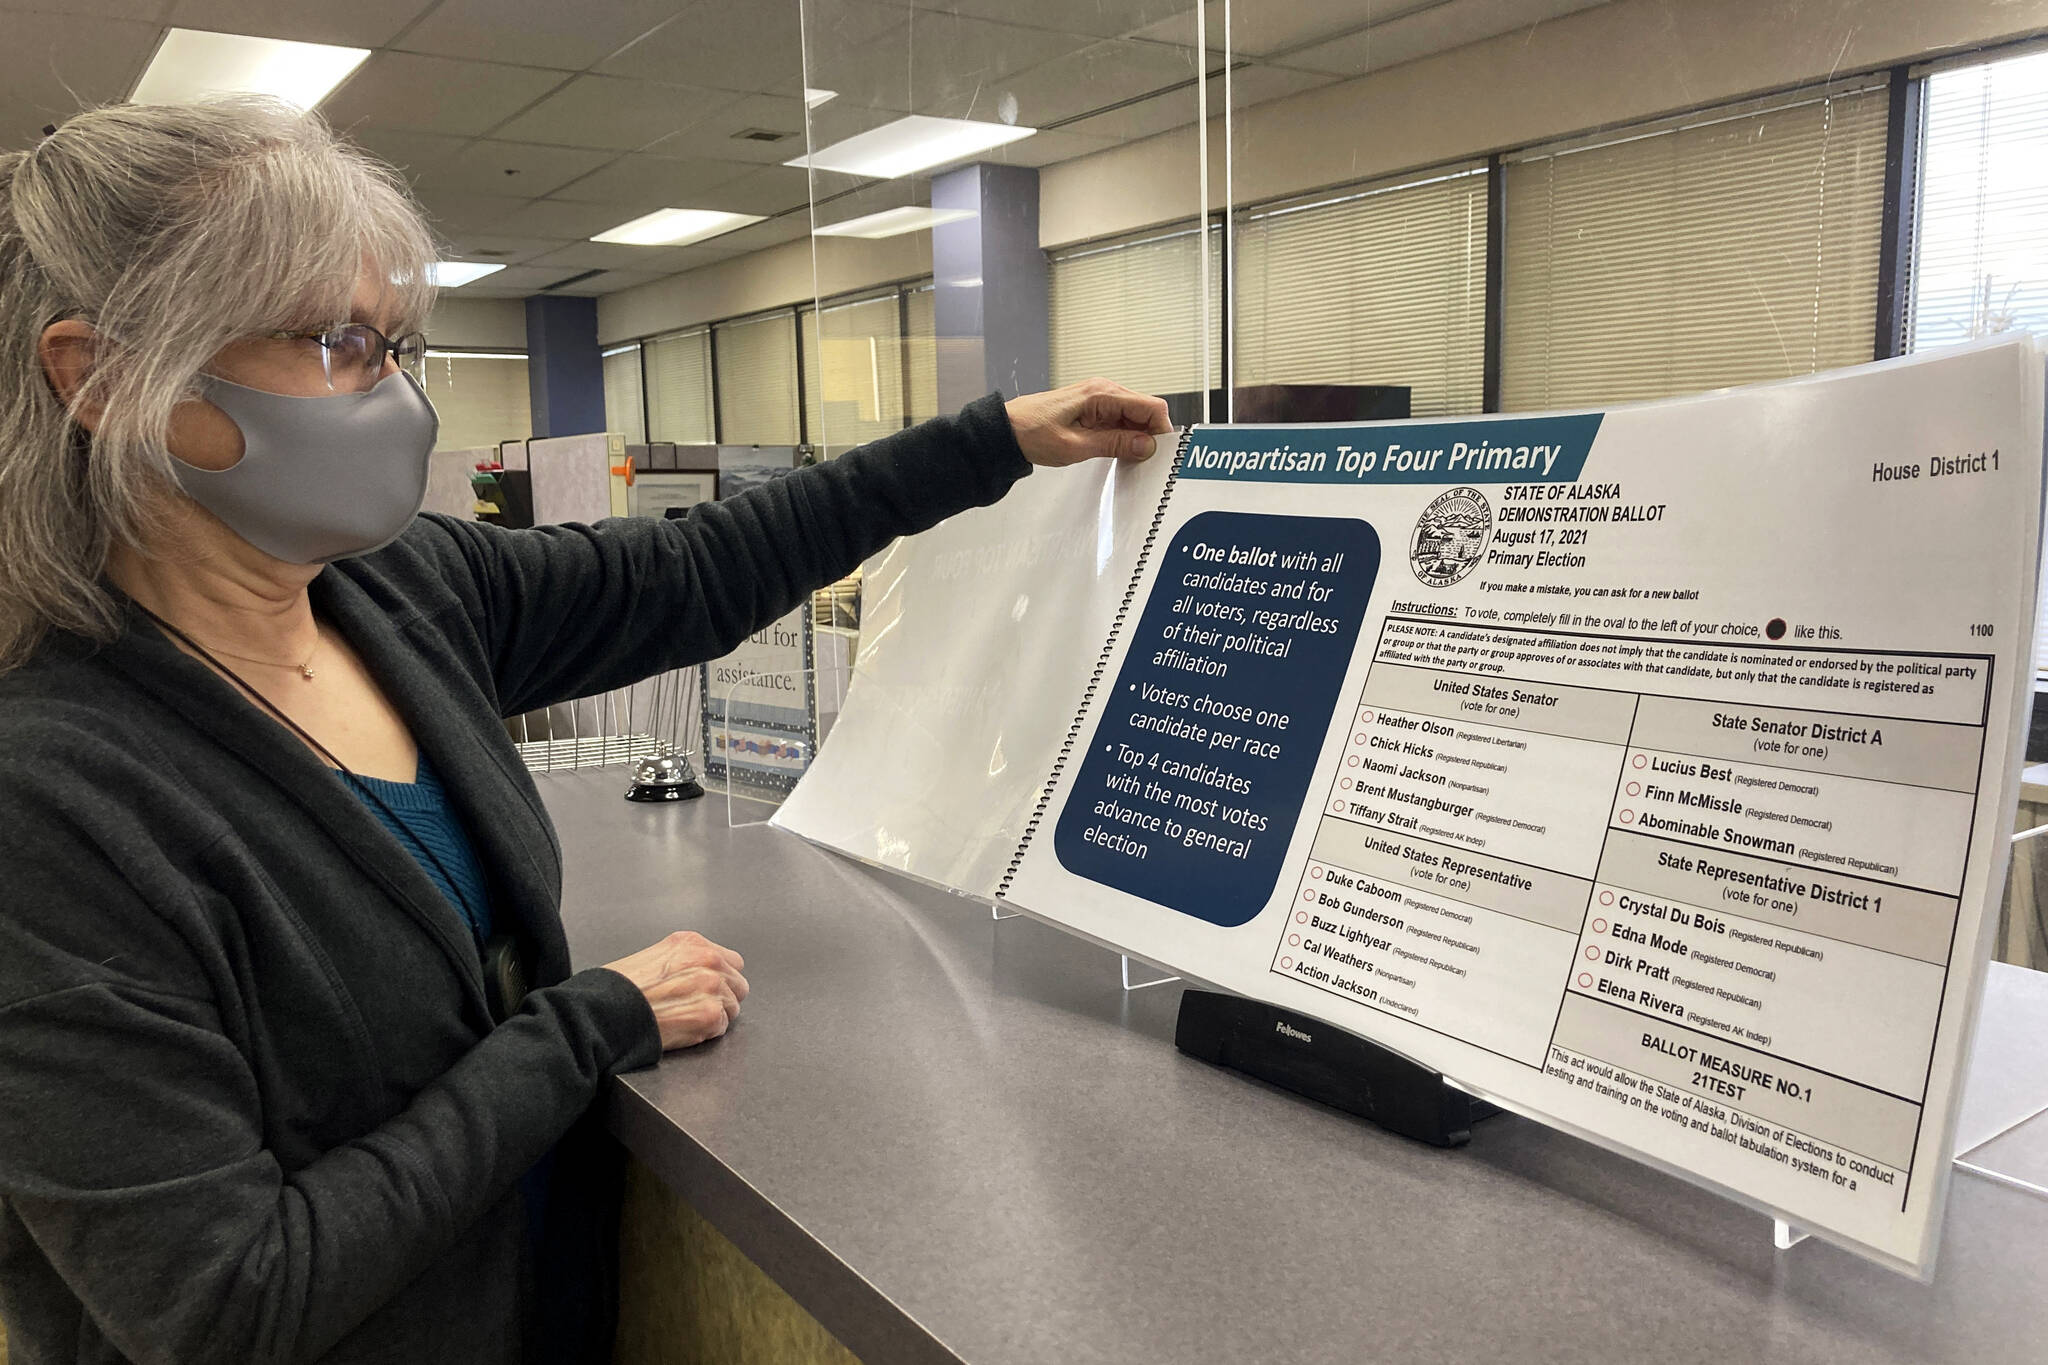 Deborah Moody, an administrative clerk at the Alaska Division of Elections office in Anchorage, Alaska, looks at an oversized booklet explaining election changes in the state on Jan. 21, 2022. Alaska elections will be held for the first time this year under a voter-backed system that scraps party primaries and sends the top four vote-getters regardless of party to the general election, where ranked choice voting will be used to determine a winner. No other state conducts its elections with that same combination. (AP Photo / Mark Thiessen)